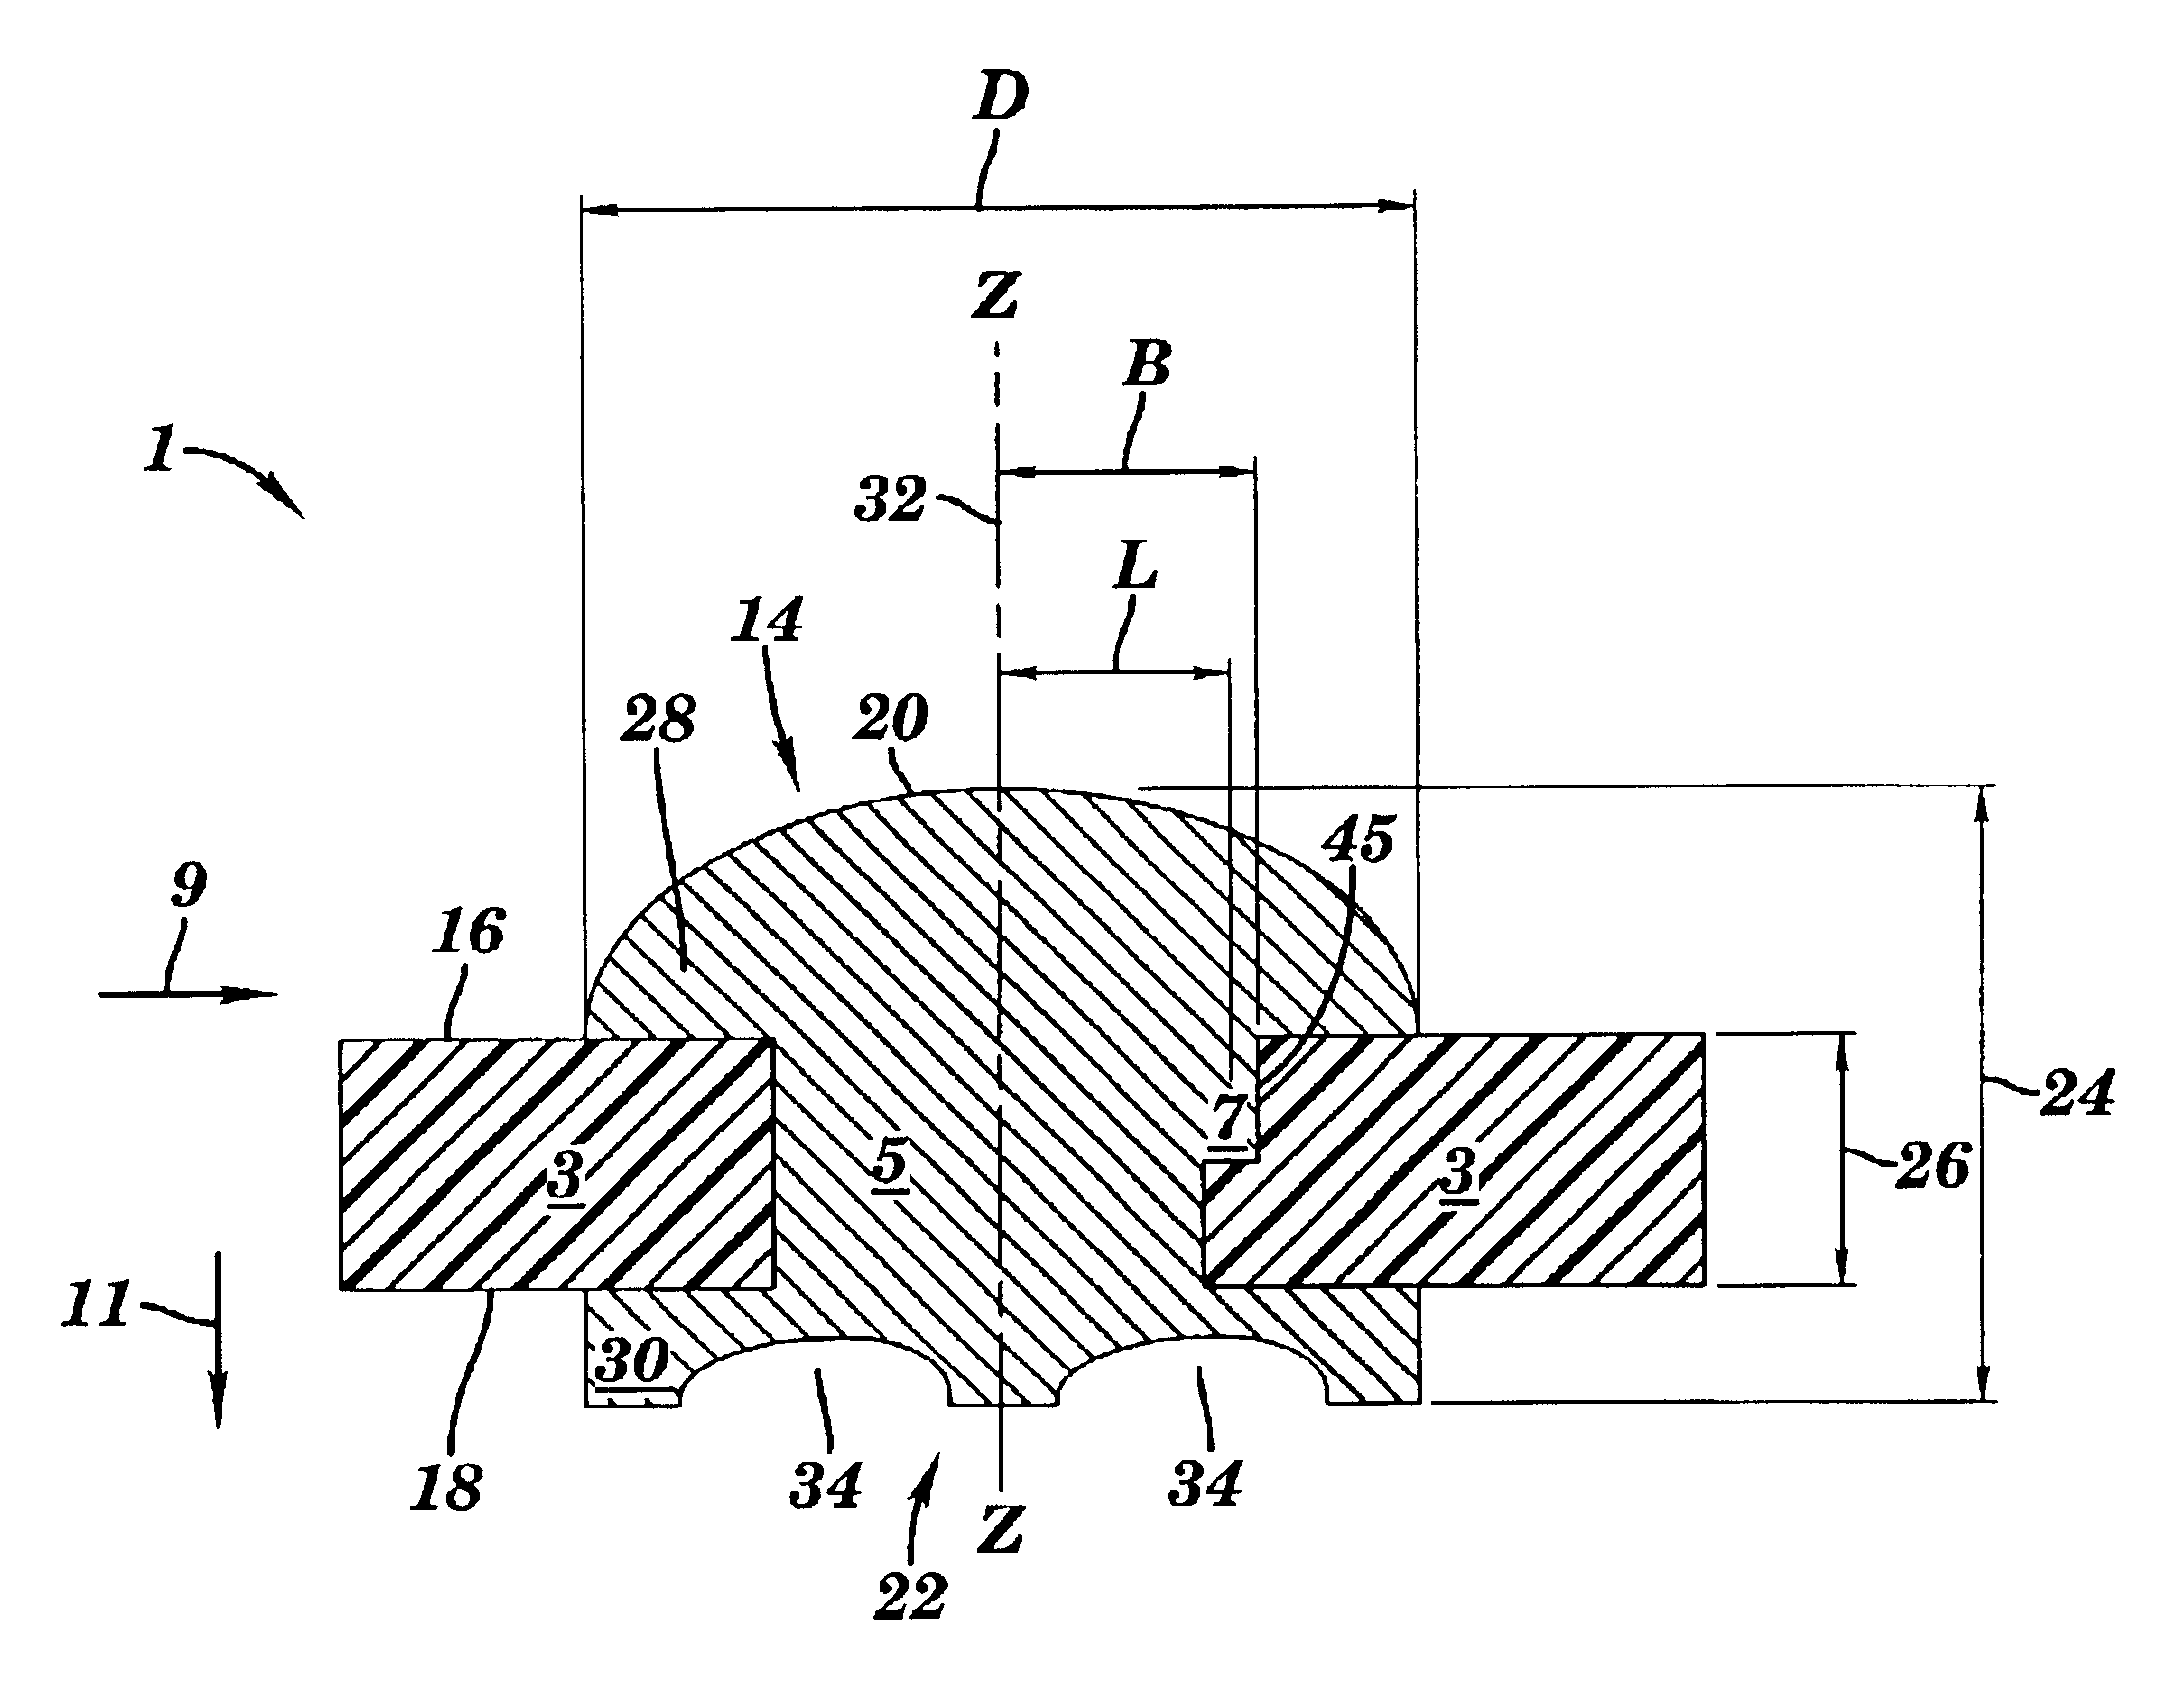 Membrane probe with anchored elements